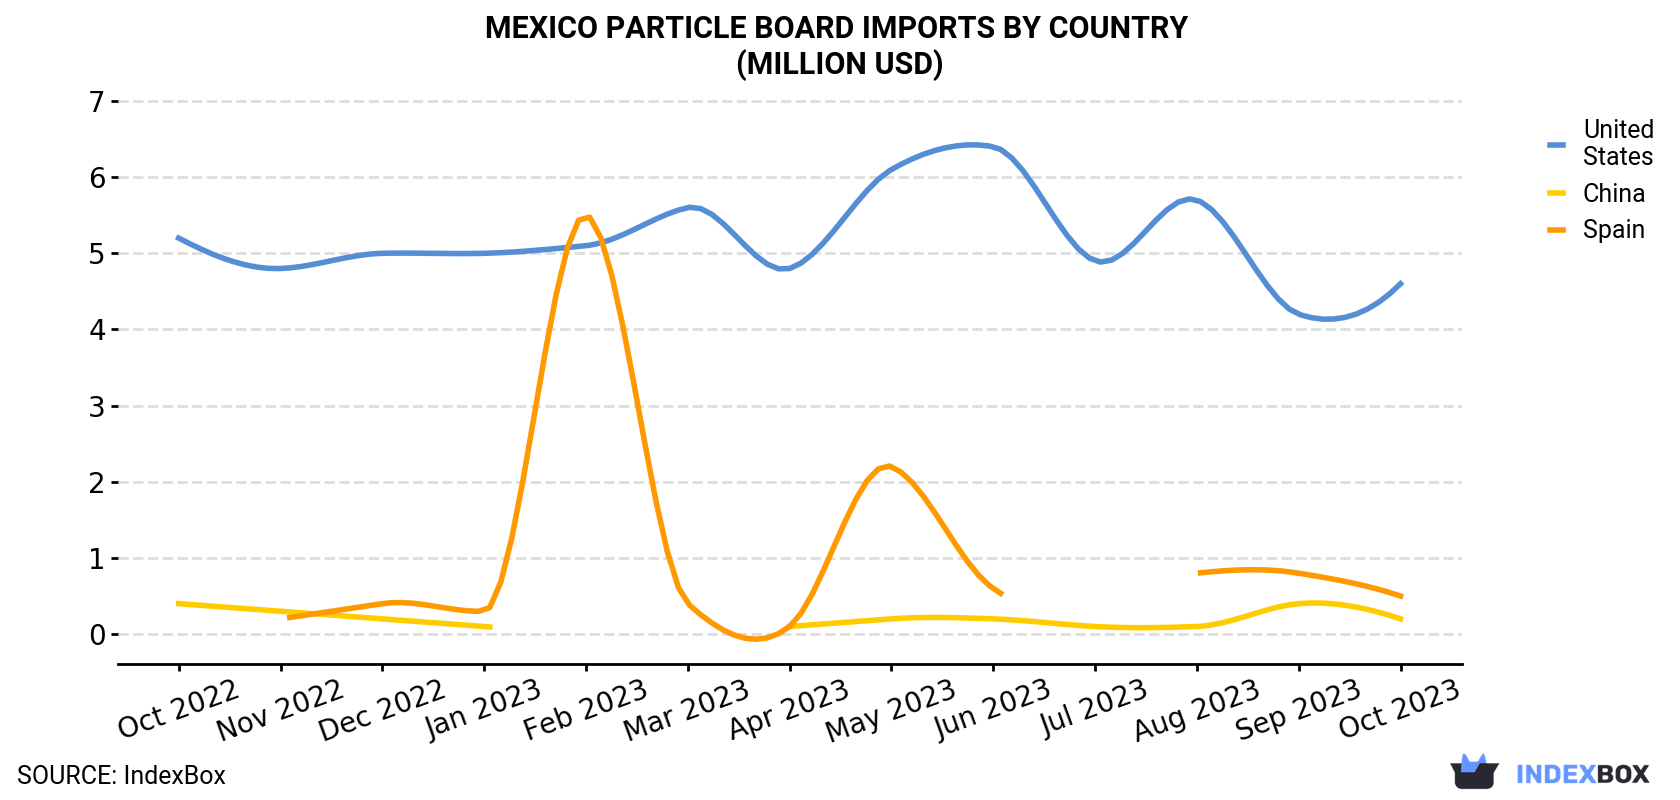 Mexico Particle Board Imports By Country (Million USD)